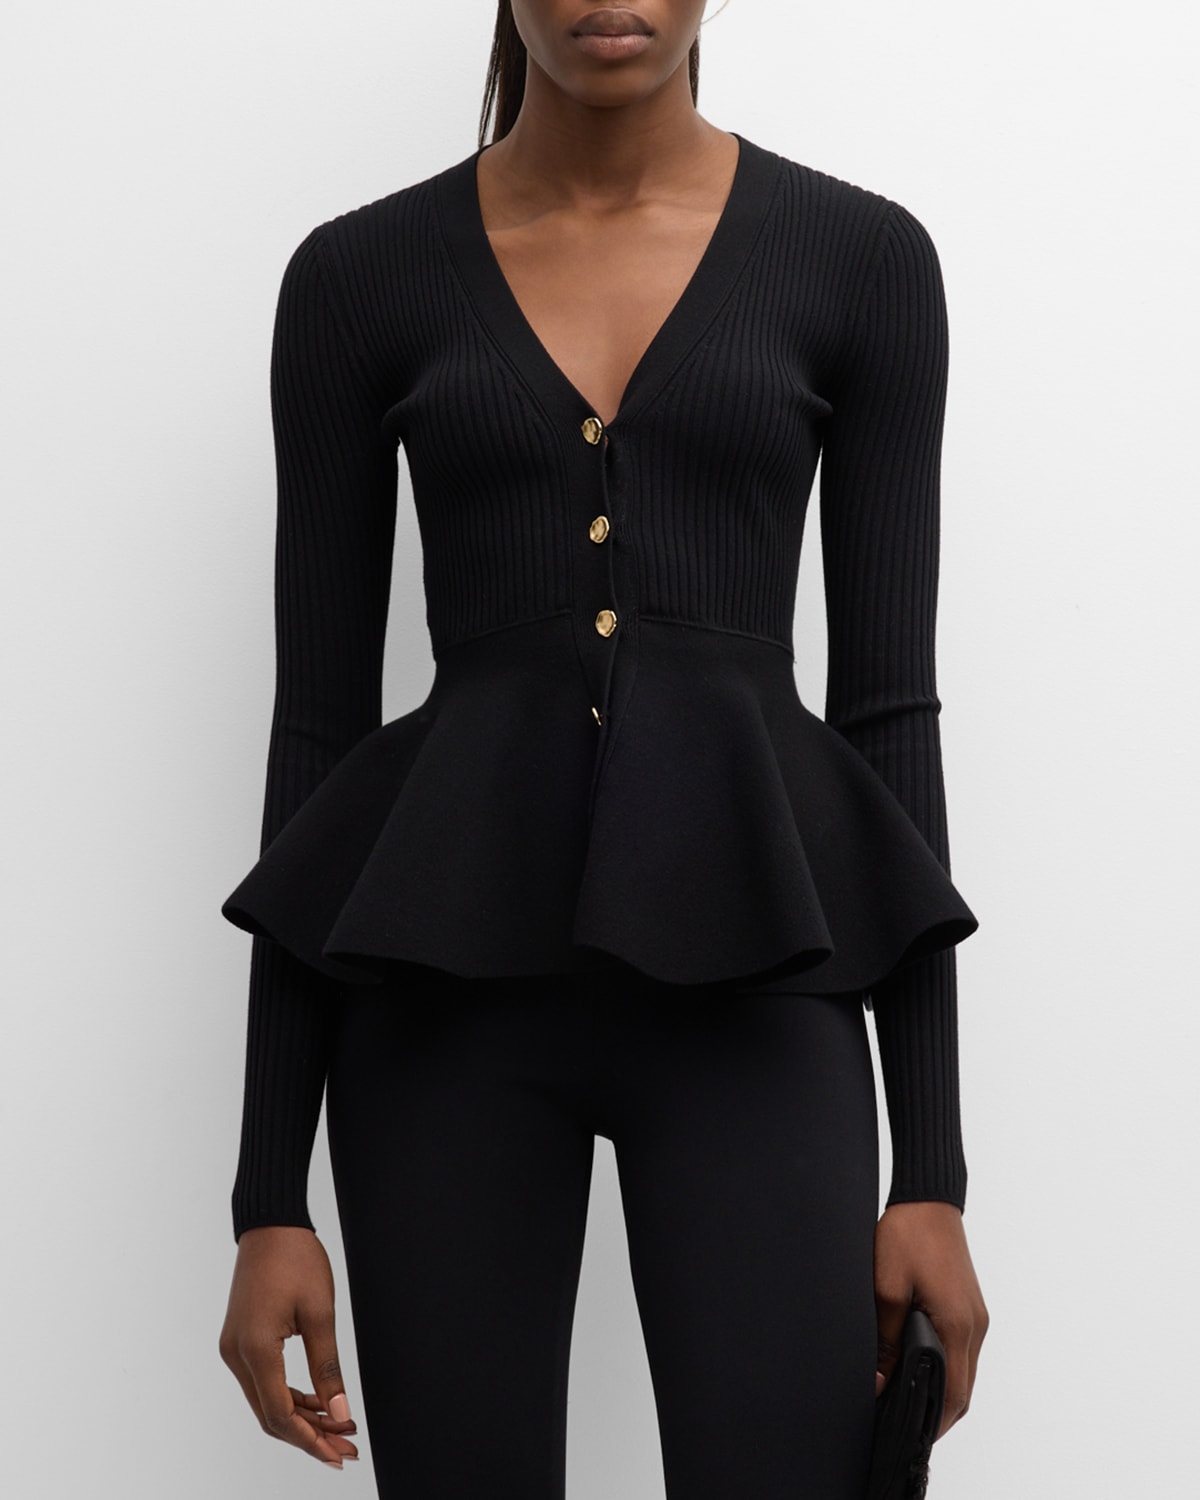 JASON WU COLLECTION RIBBED PEPLUM CARDIGAN WITH GOLD-TONE BUTTONS